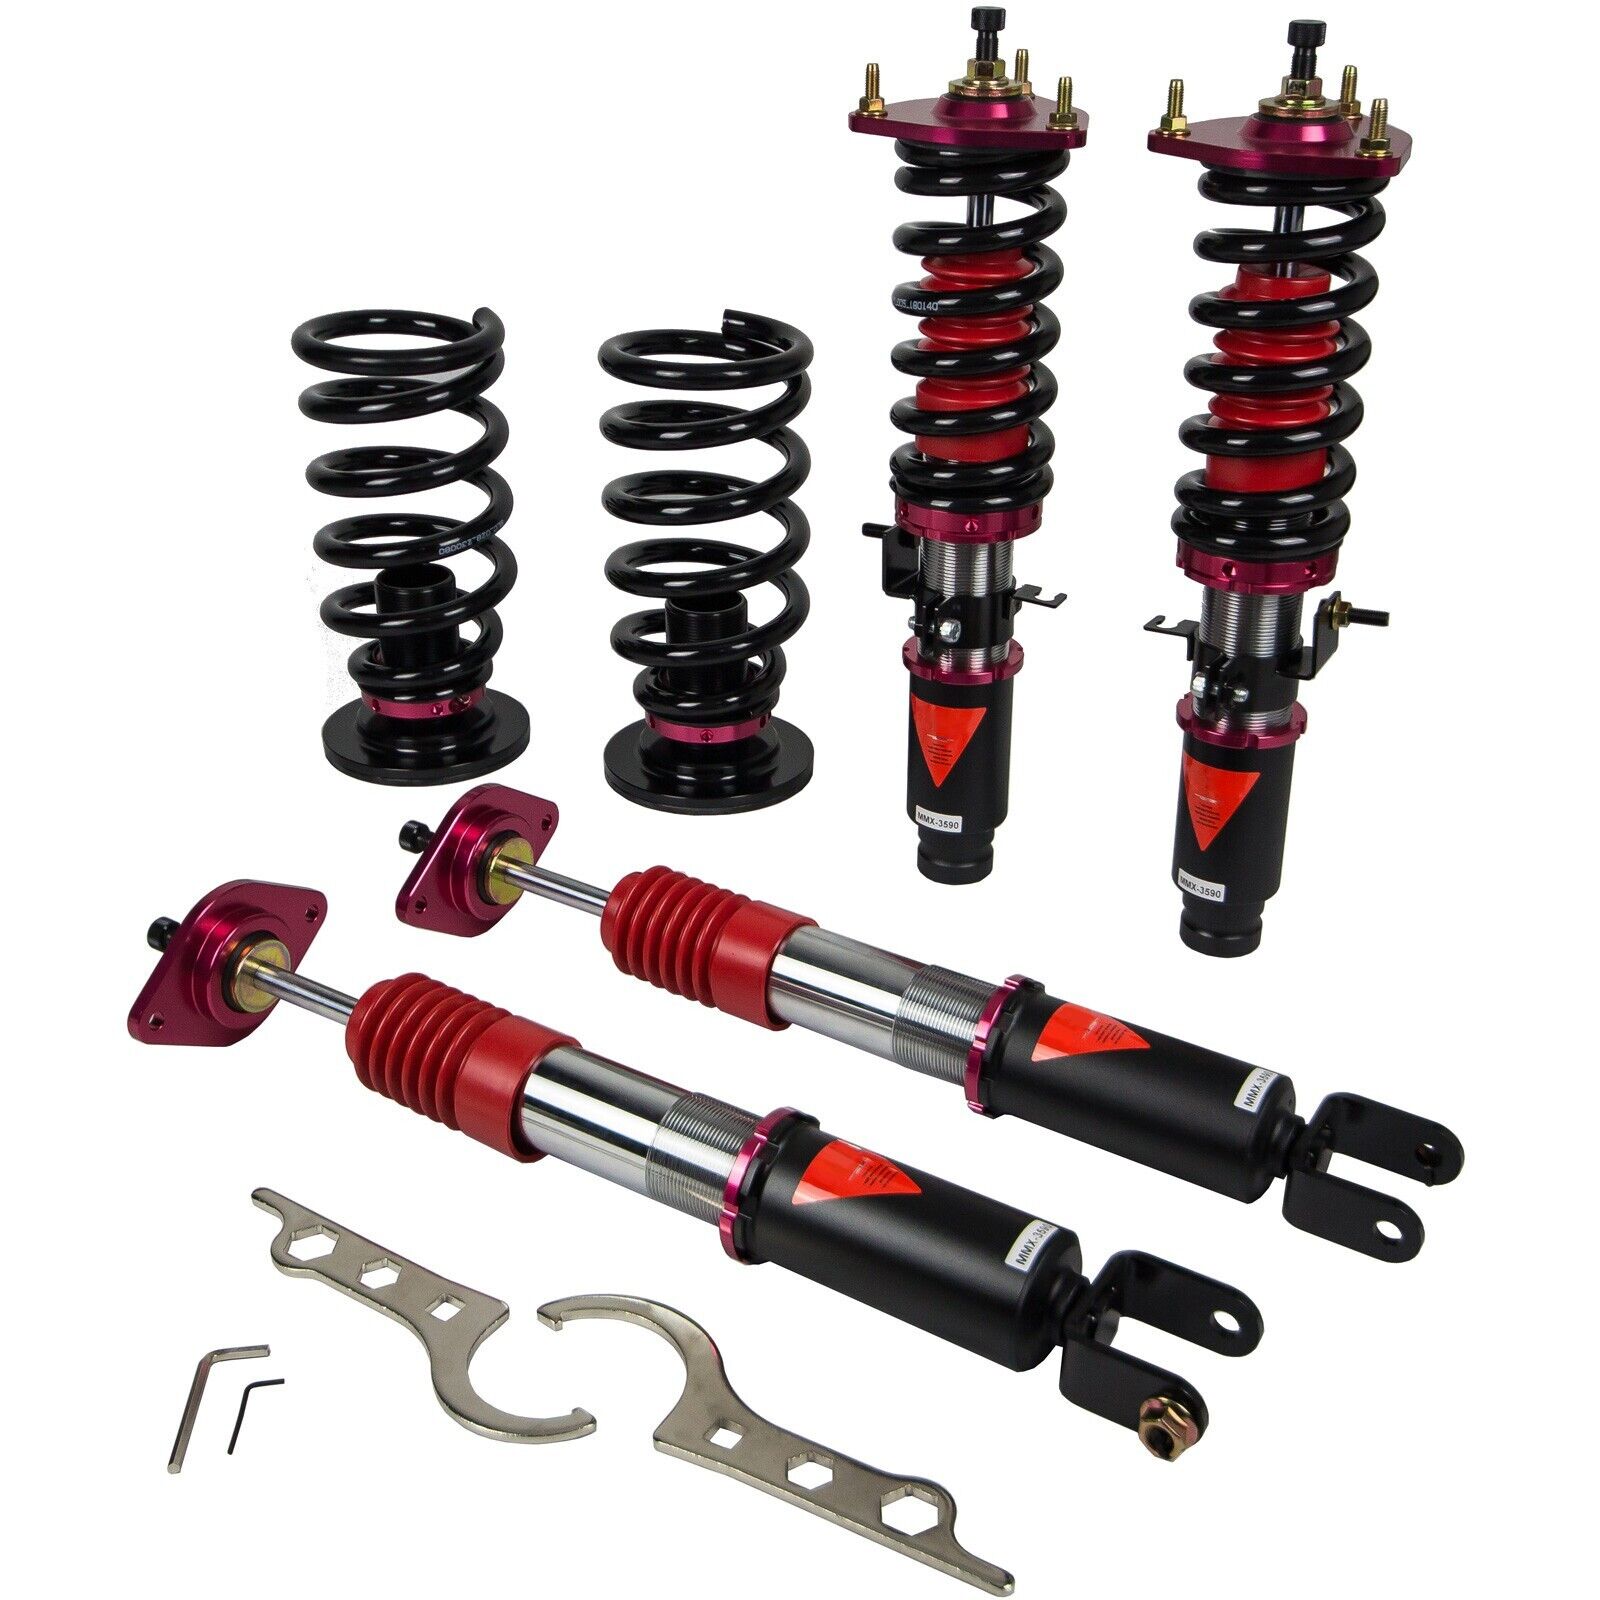 Godspeed GSP Maxx Coilovers Lowering Suspension Kit for G37x Coupe & Sedan AWD